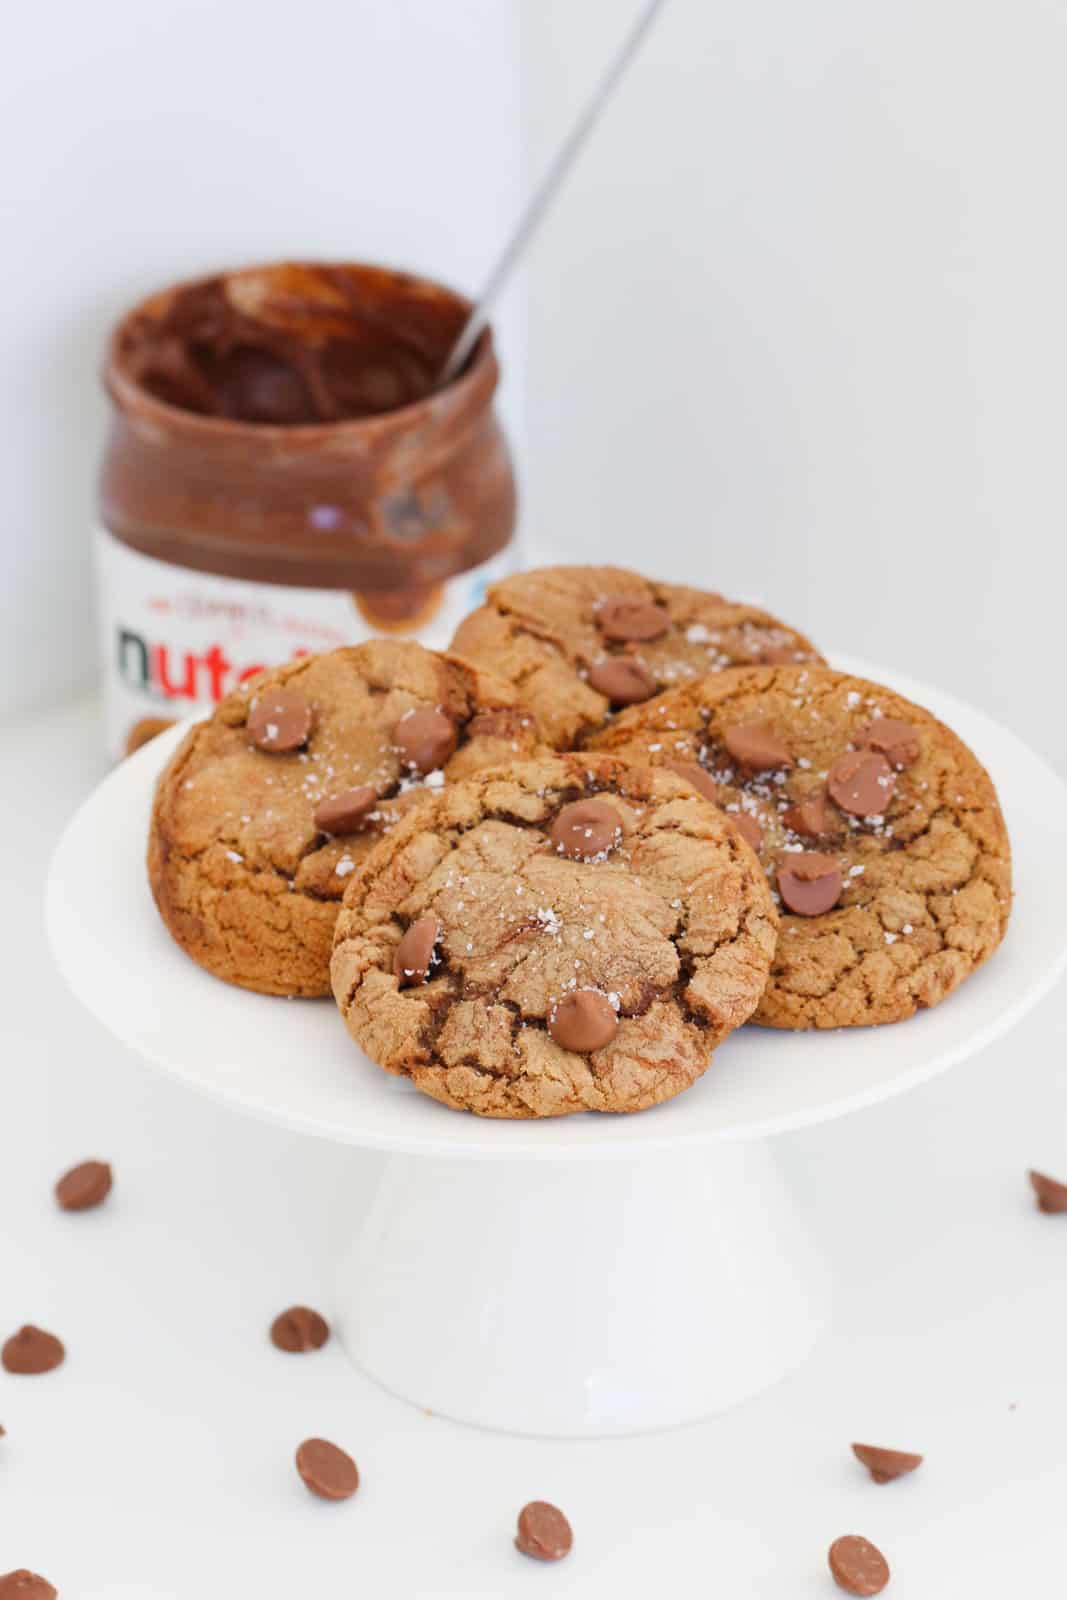 4 cookies served on a white cake stand with a jar of Nutella in the background.